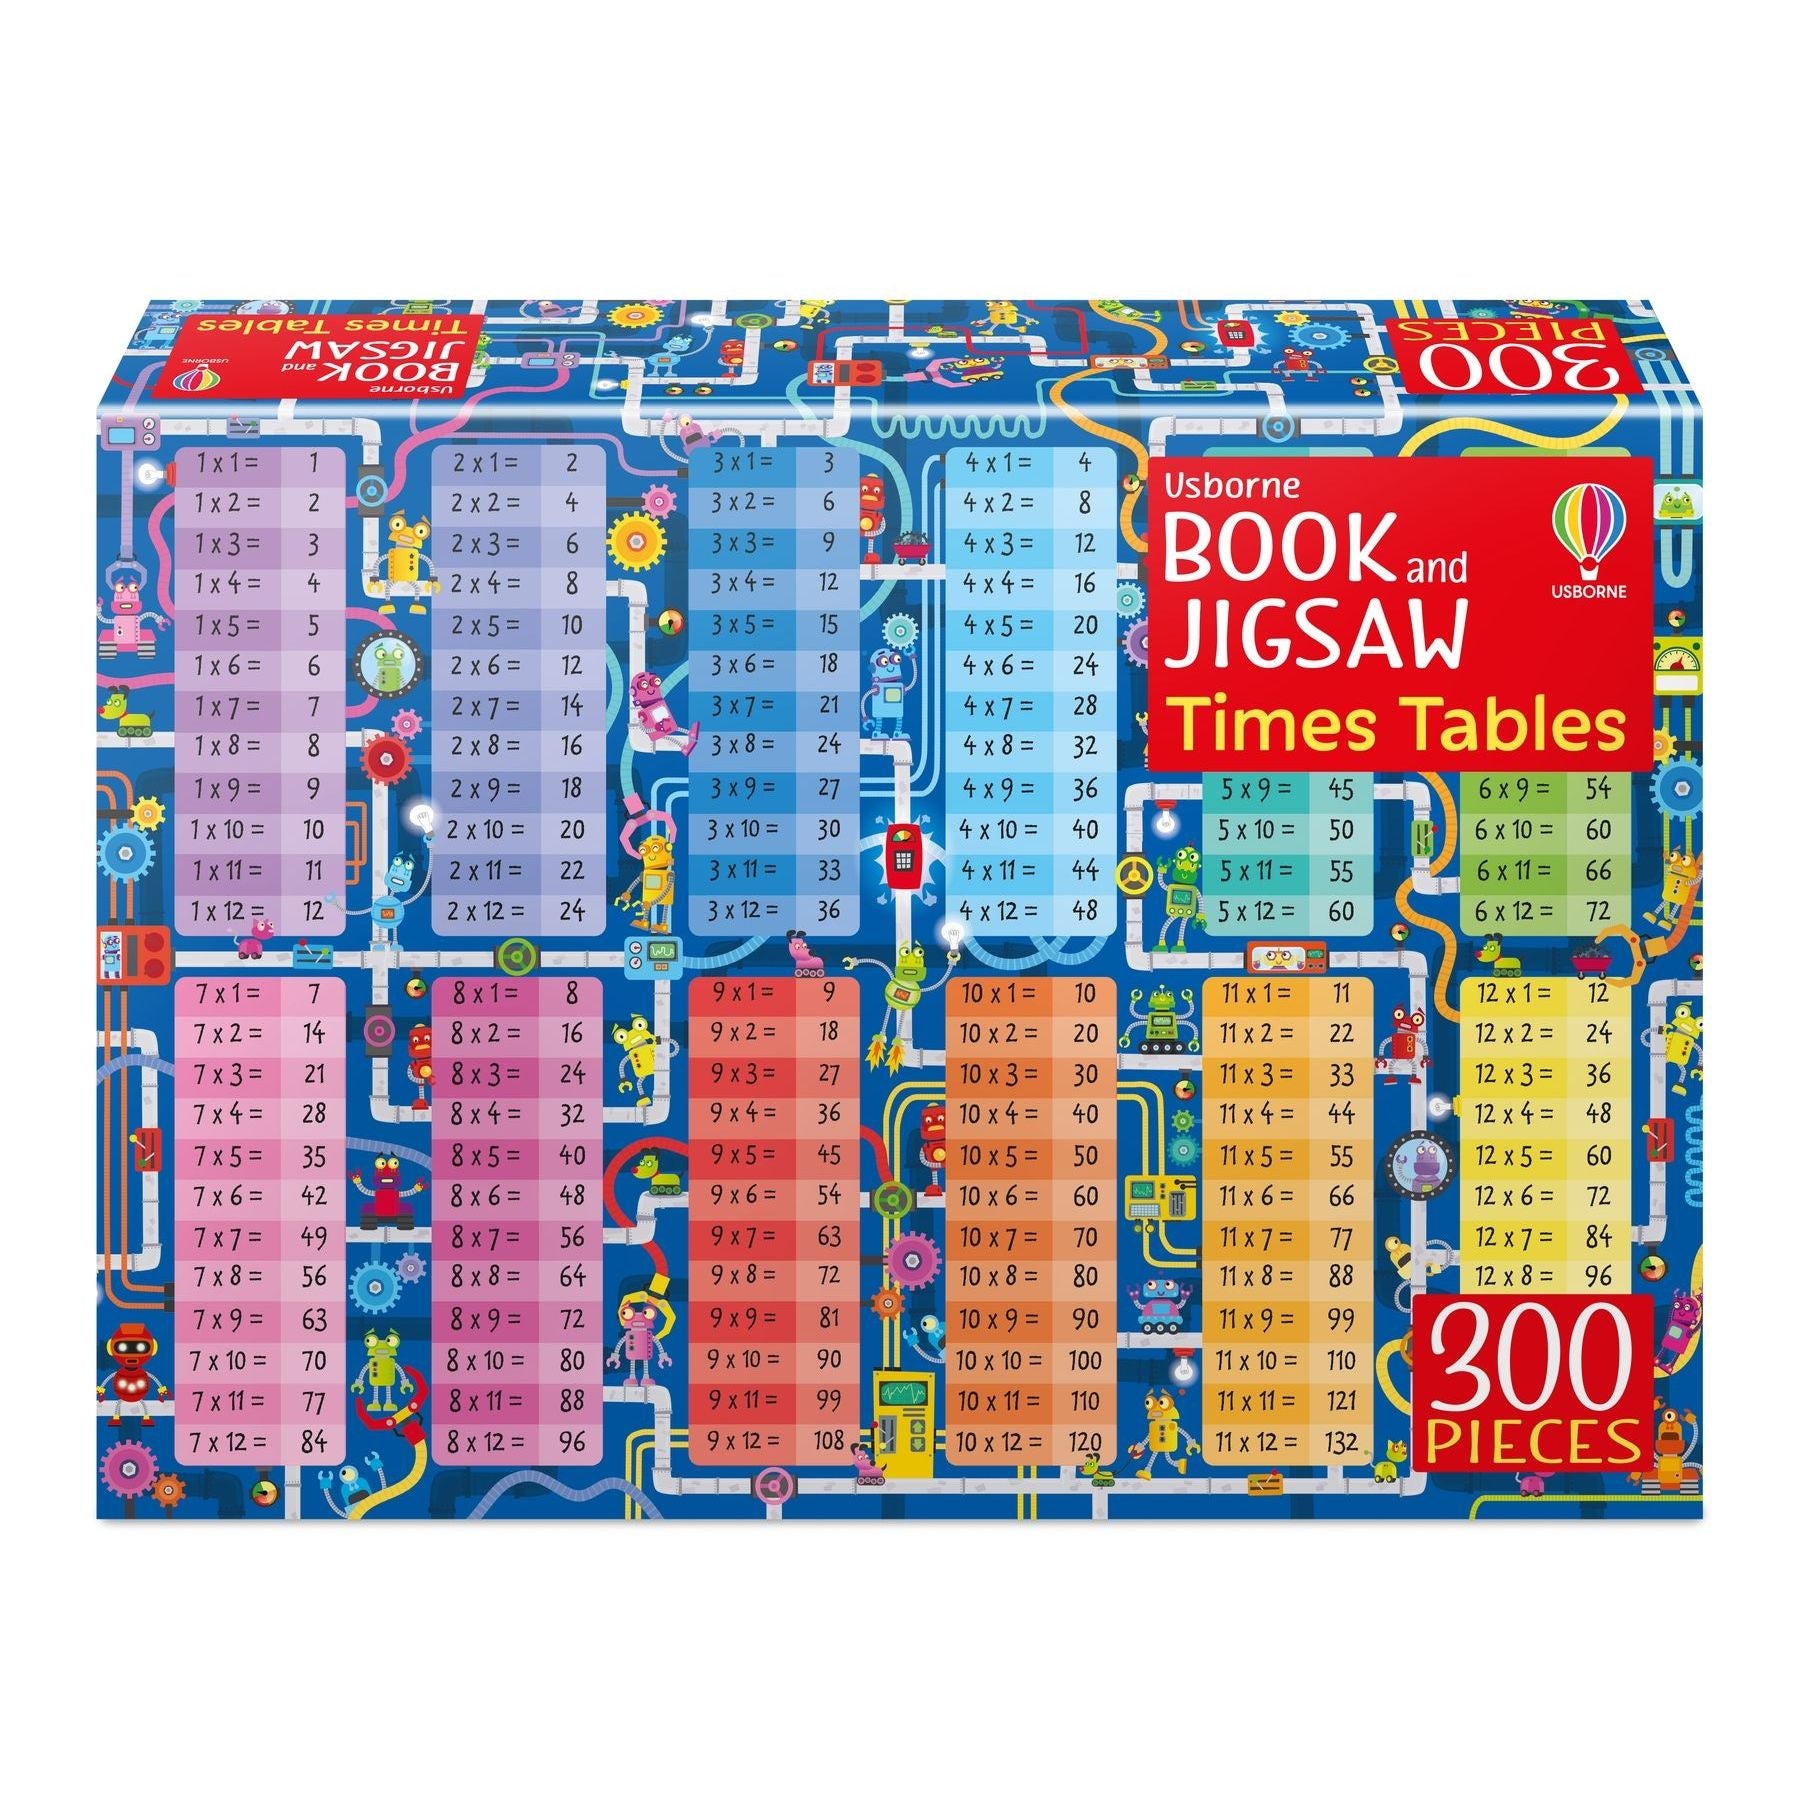 Usborne Book and Times Tables Jigsaw